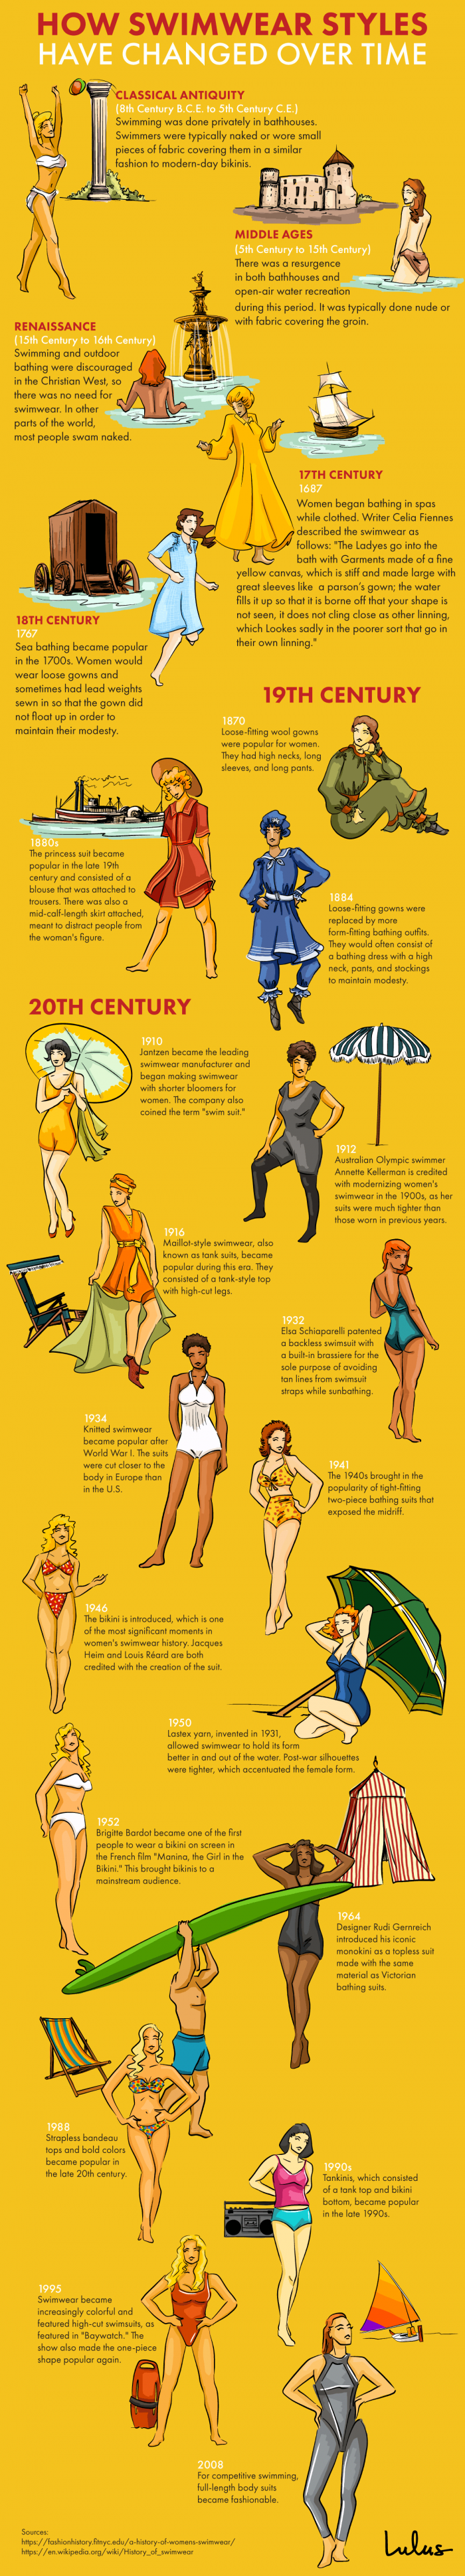 How swimwear styles have changed over time